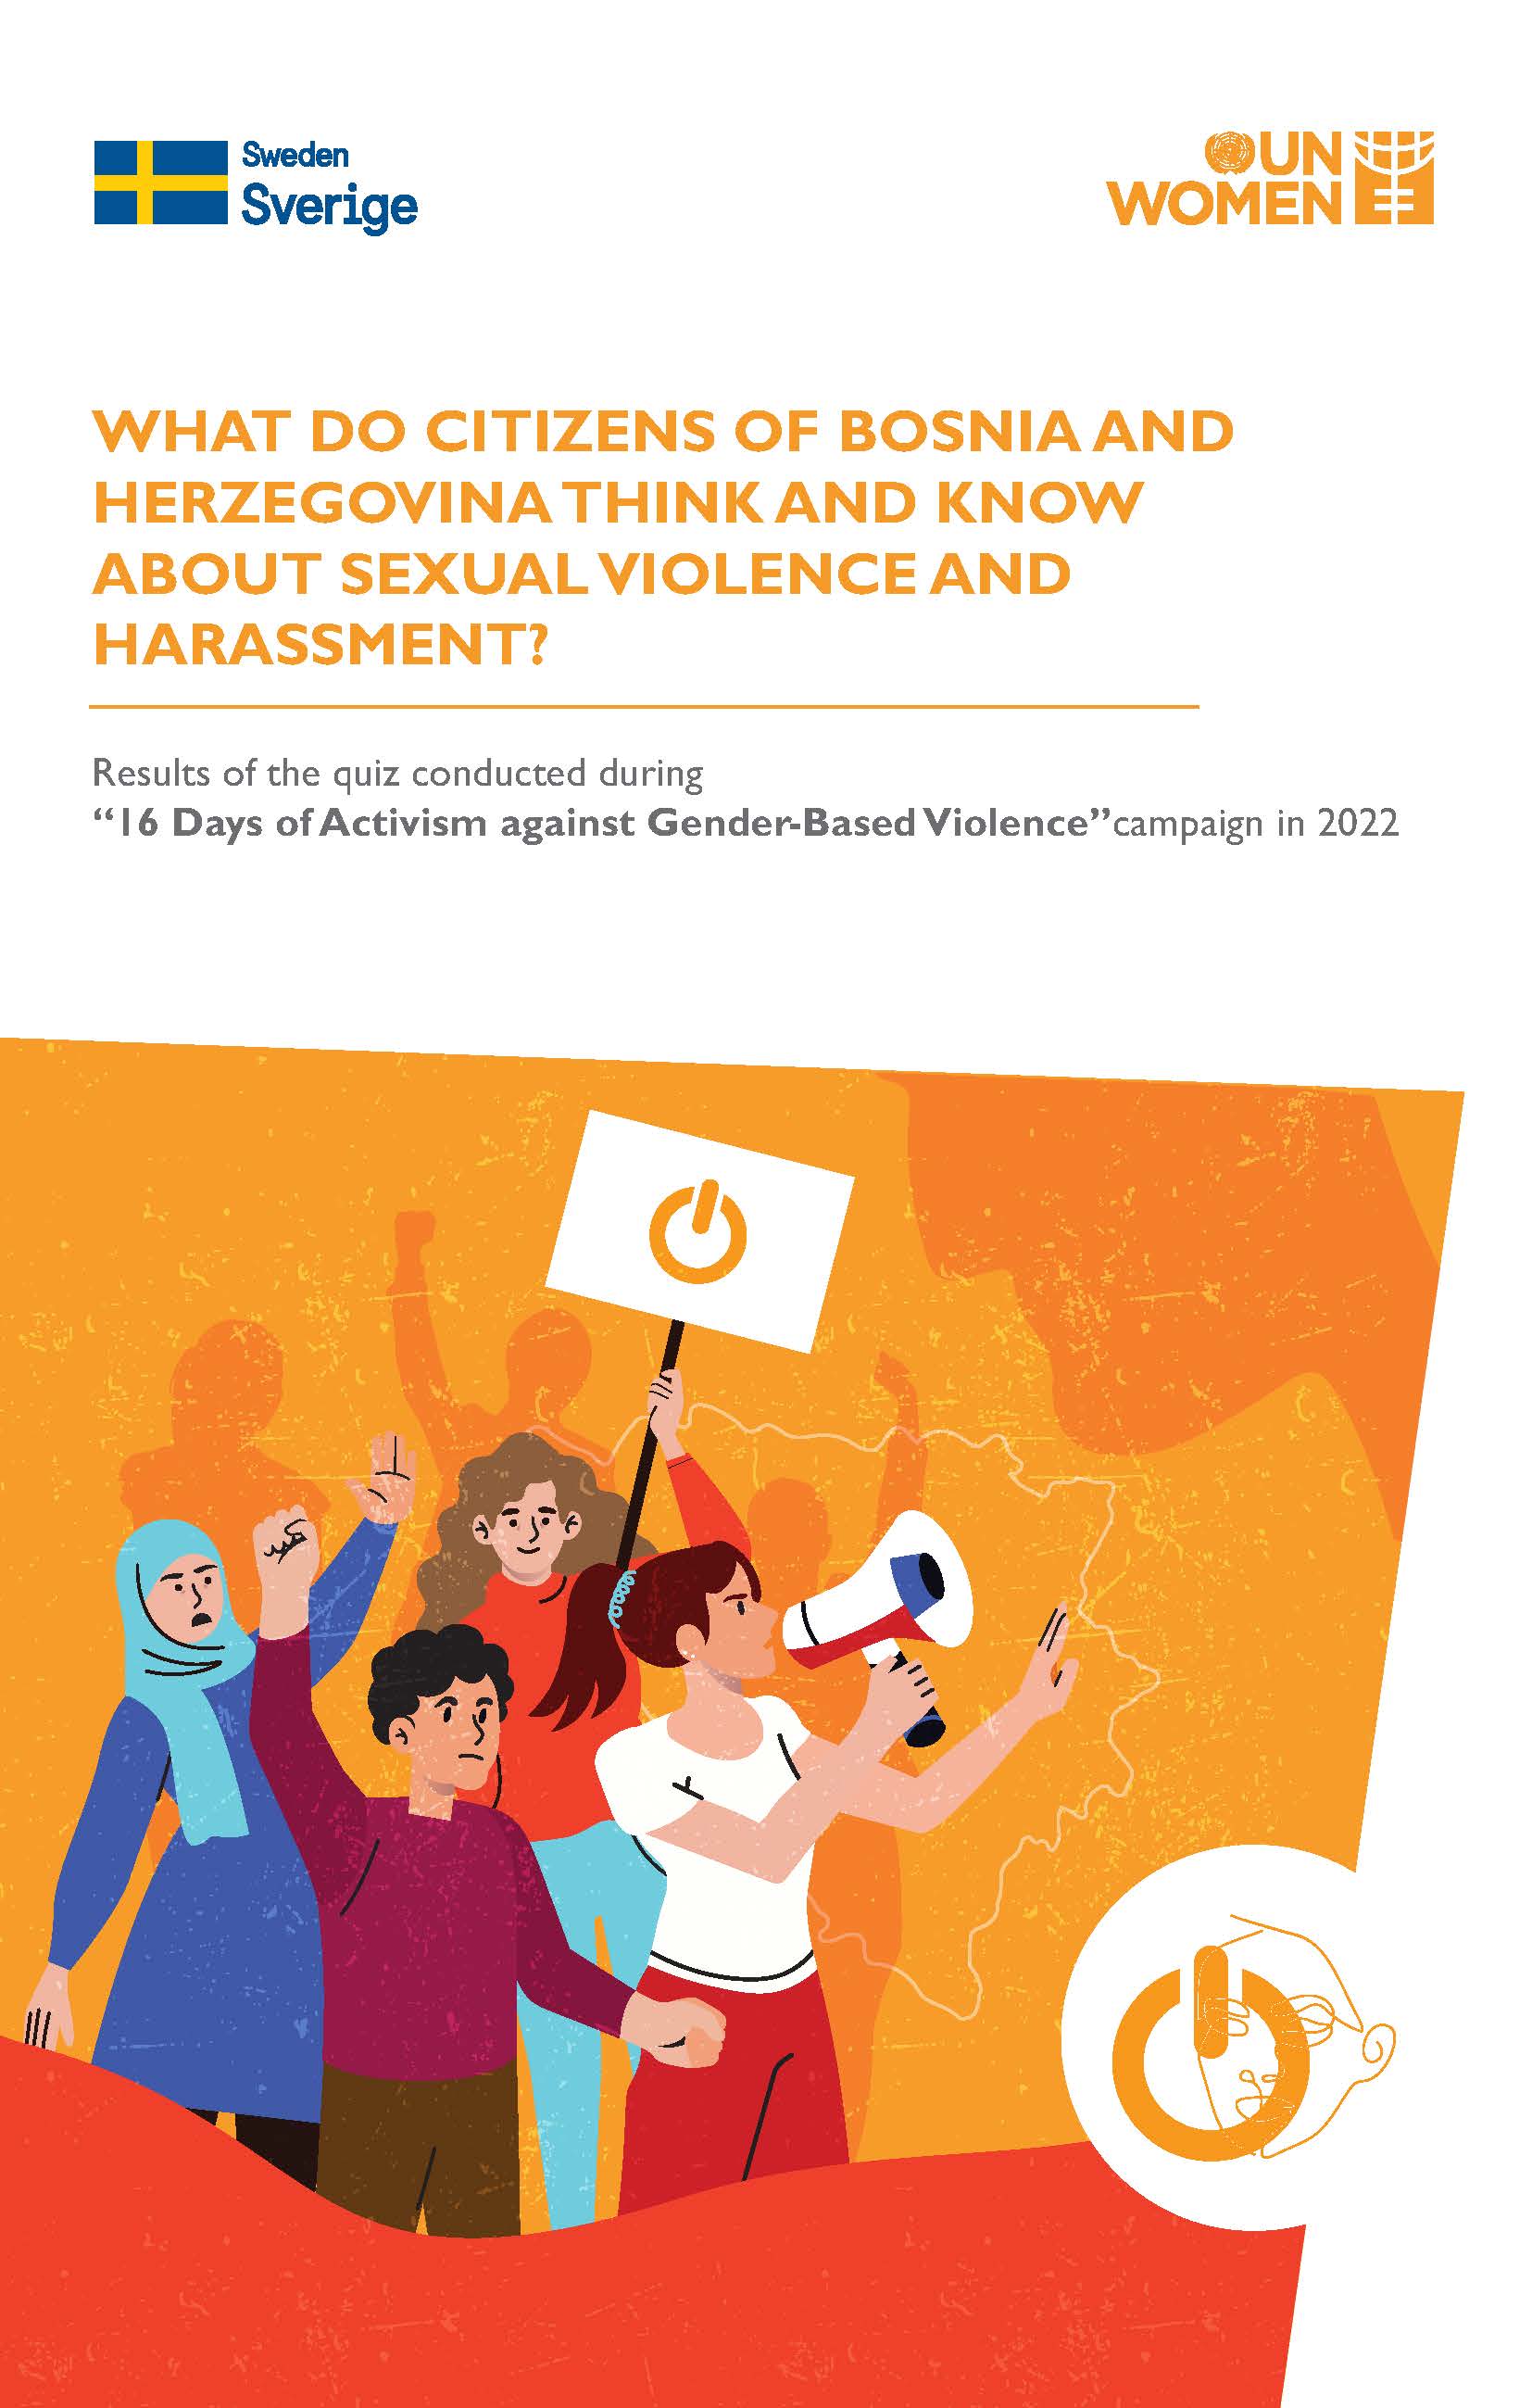 What do citizens of Bosnia and Herzegovina think and know about sexual violence and harassment?